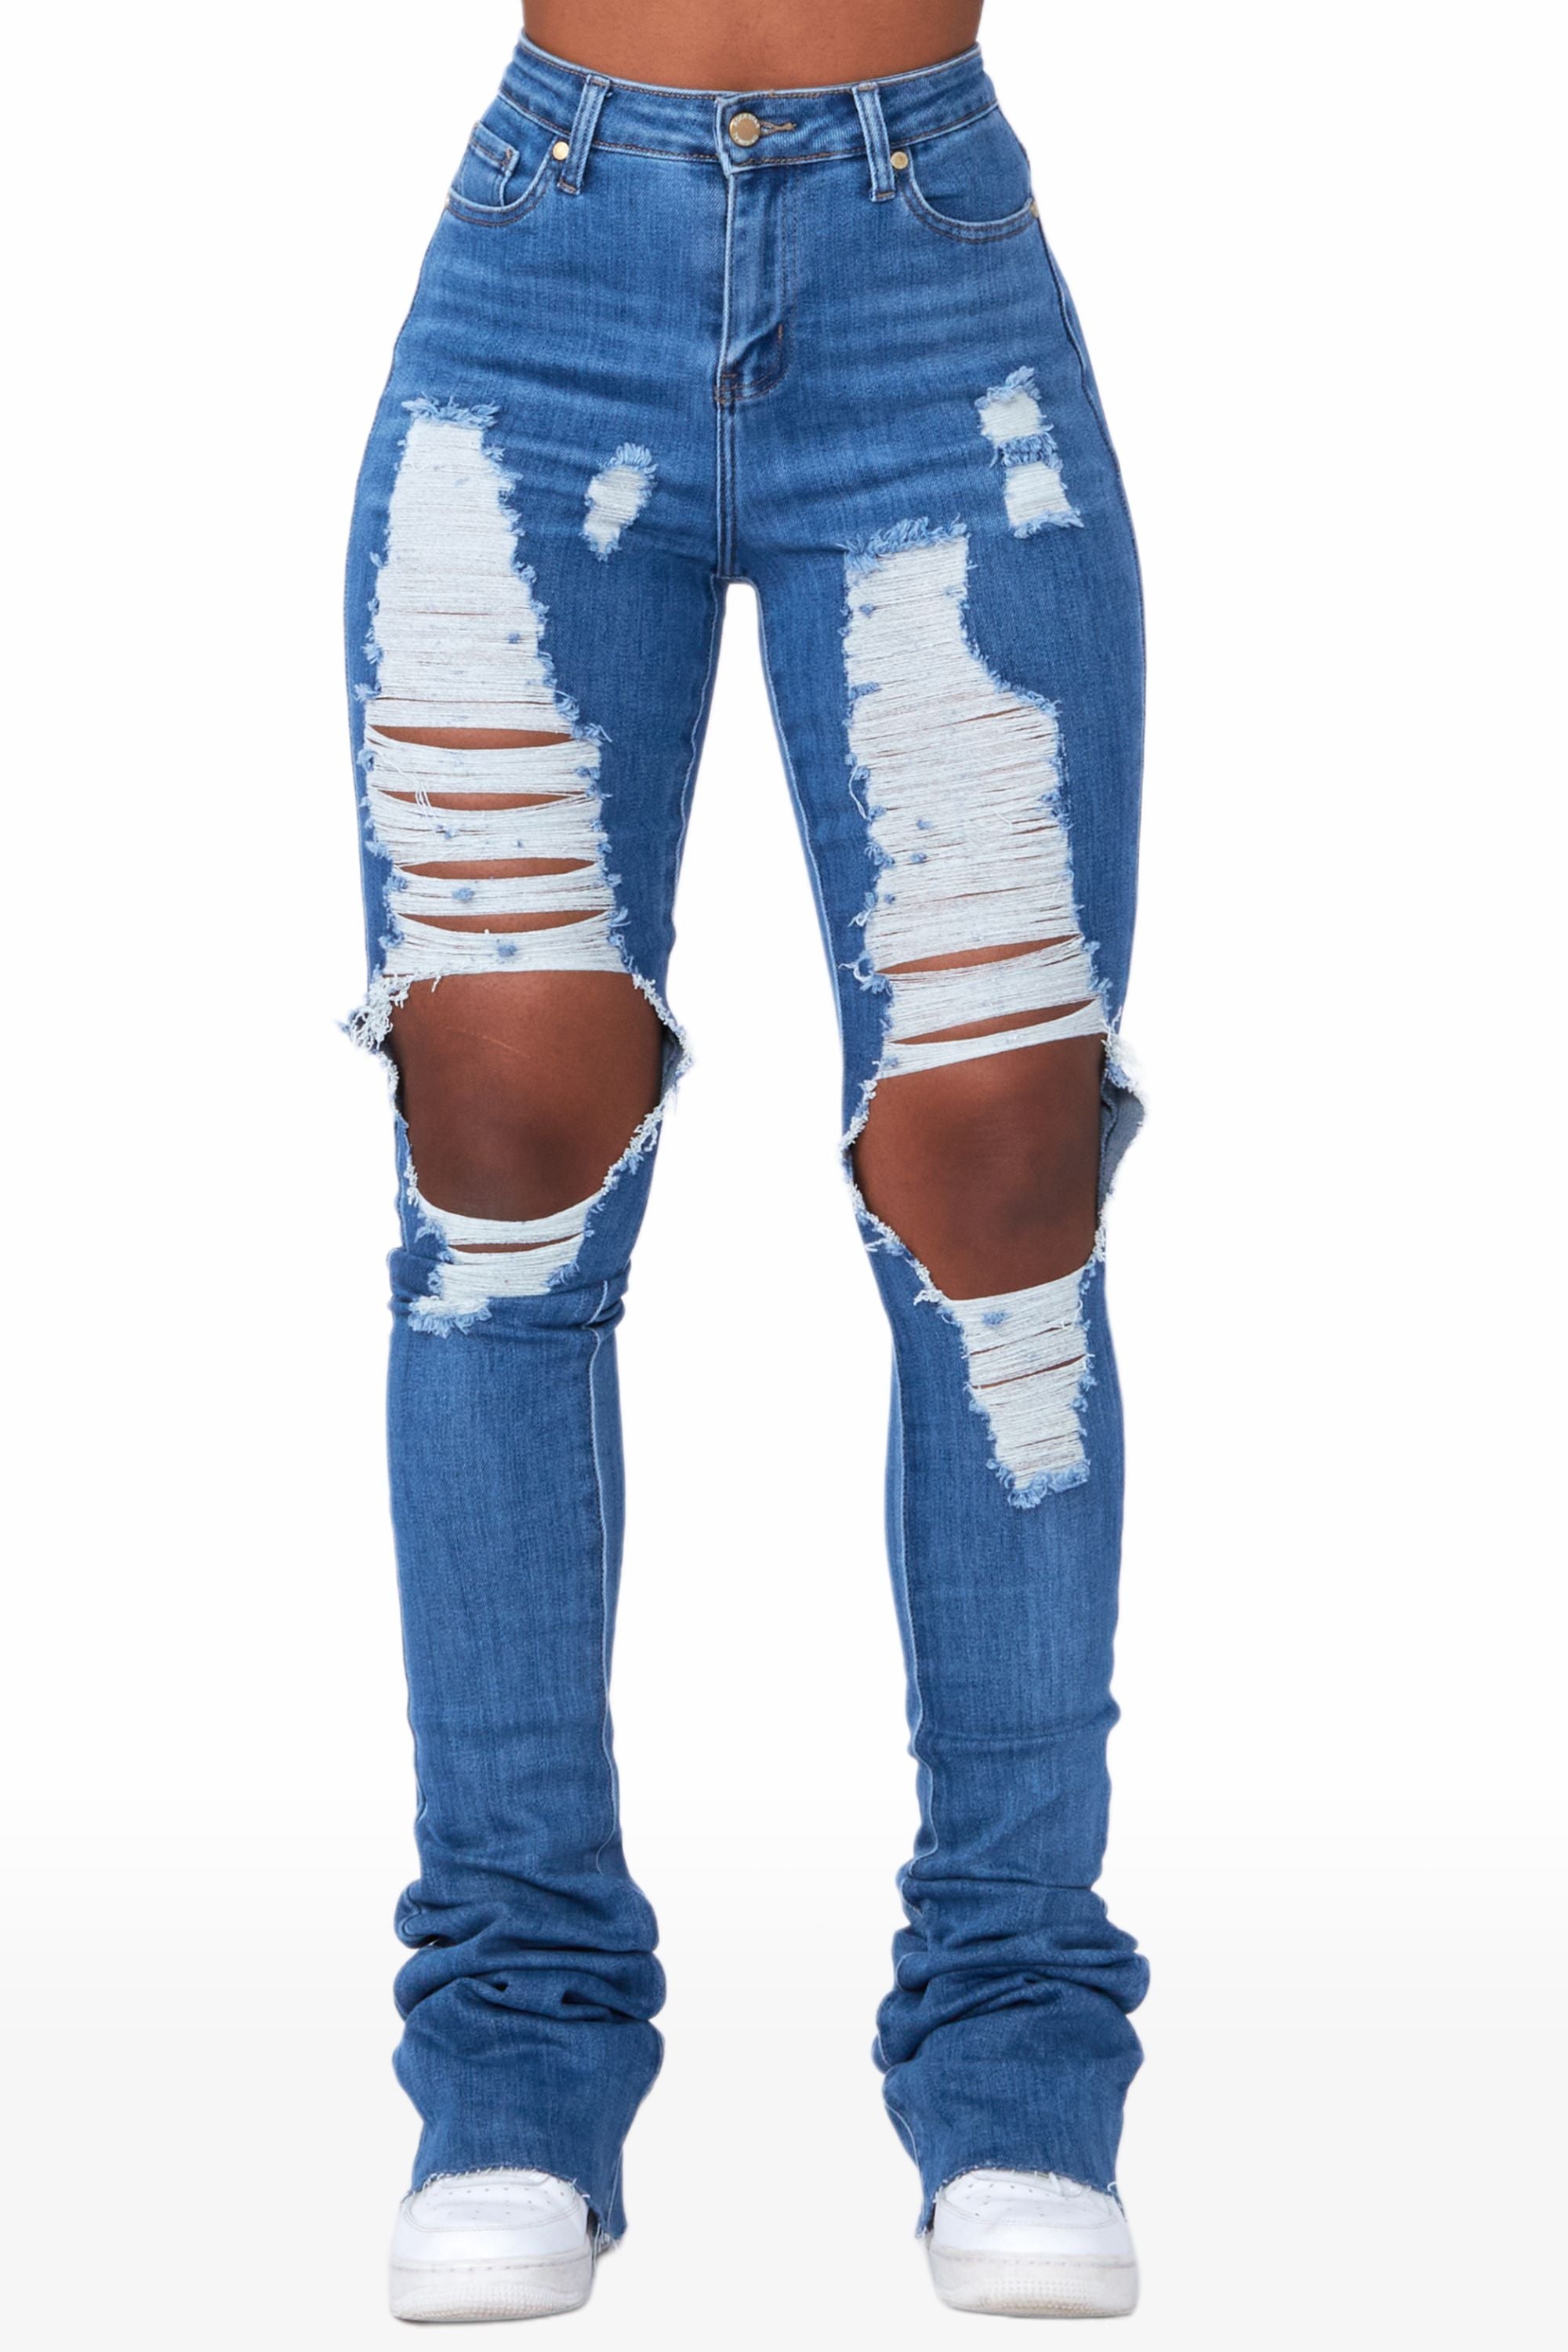 Yours Truly Med. Wash Distressed Super Stacked Jean